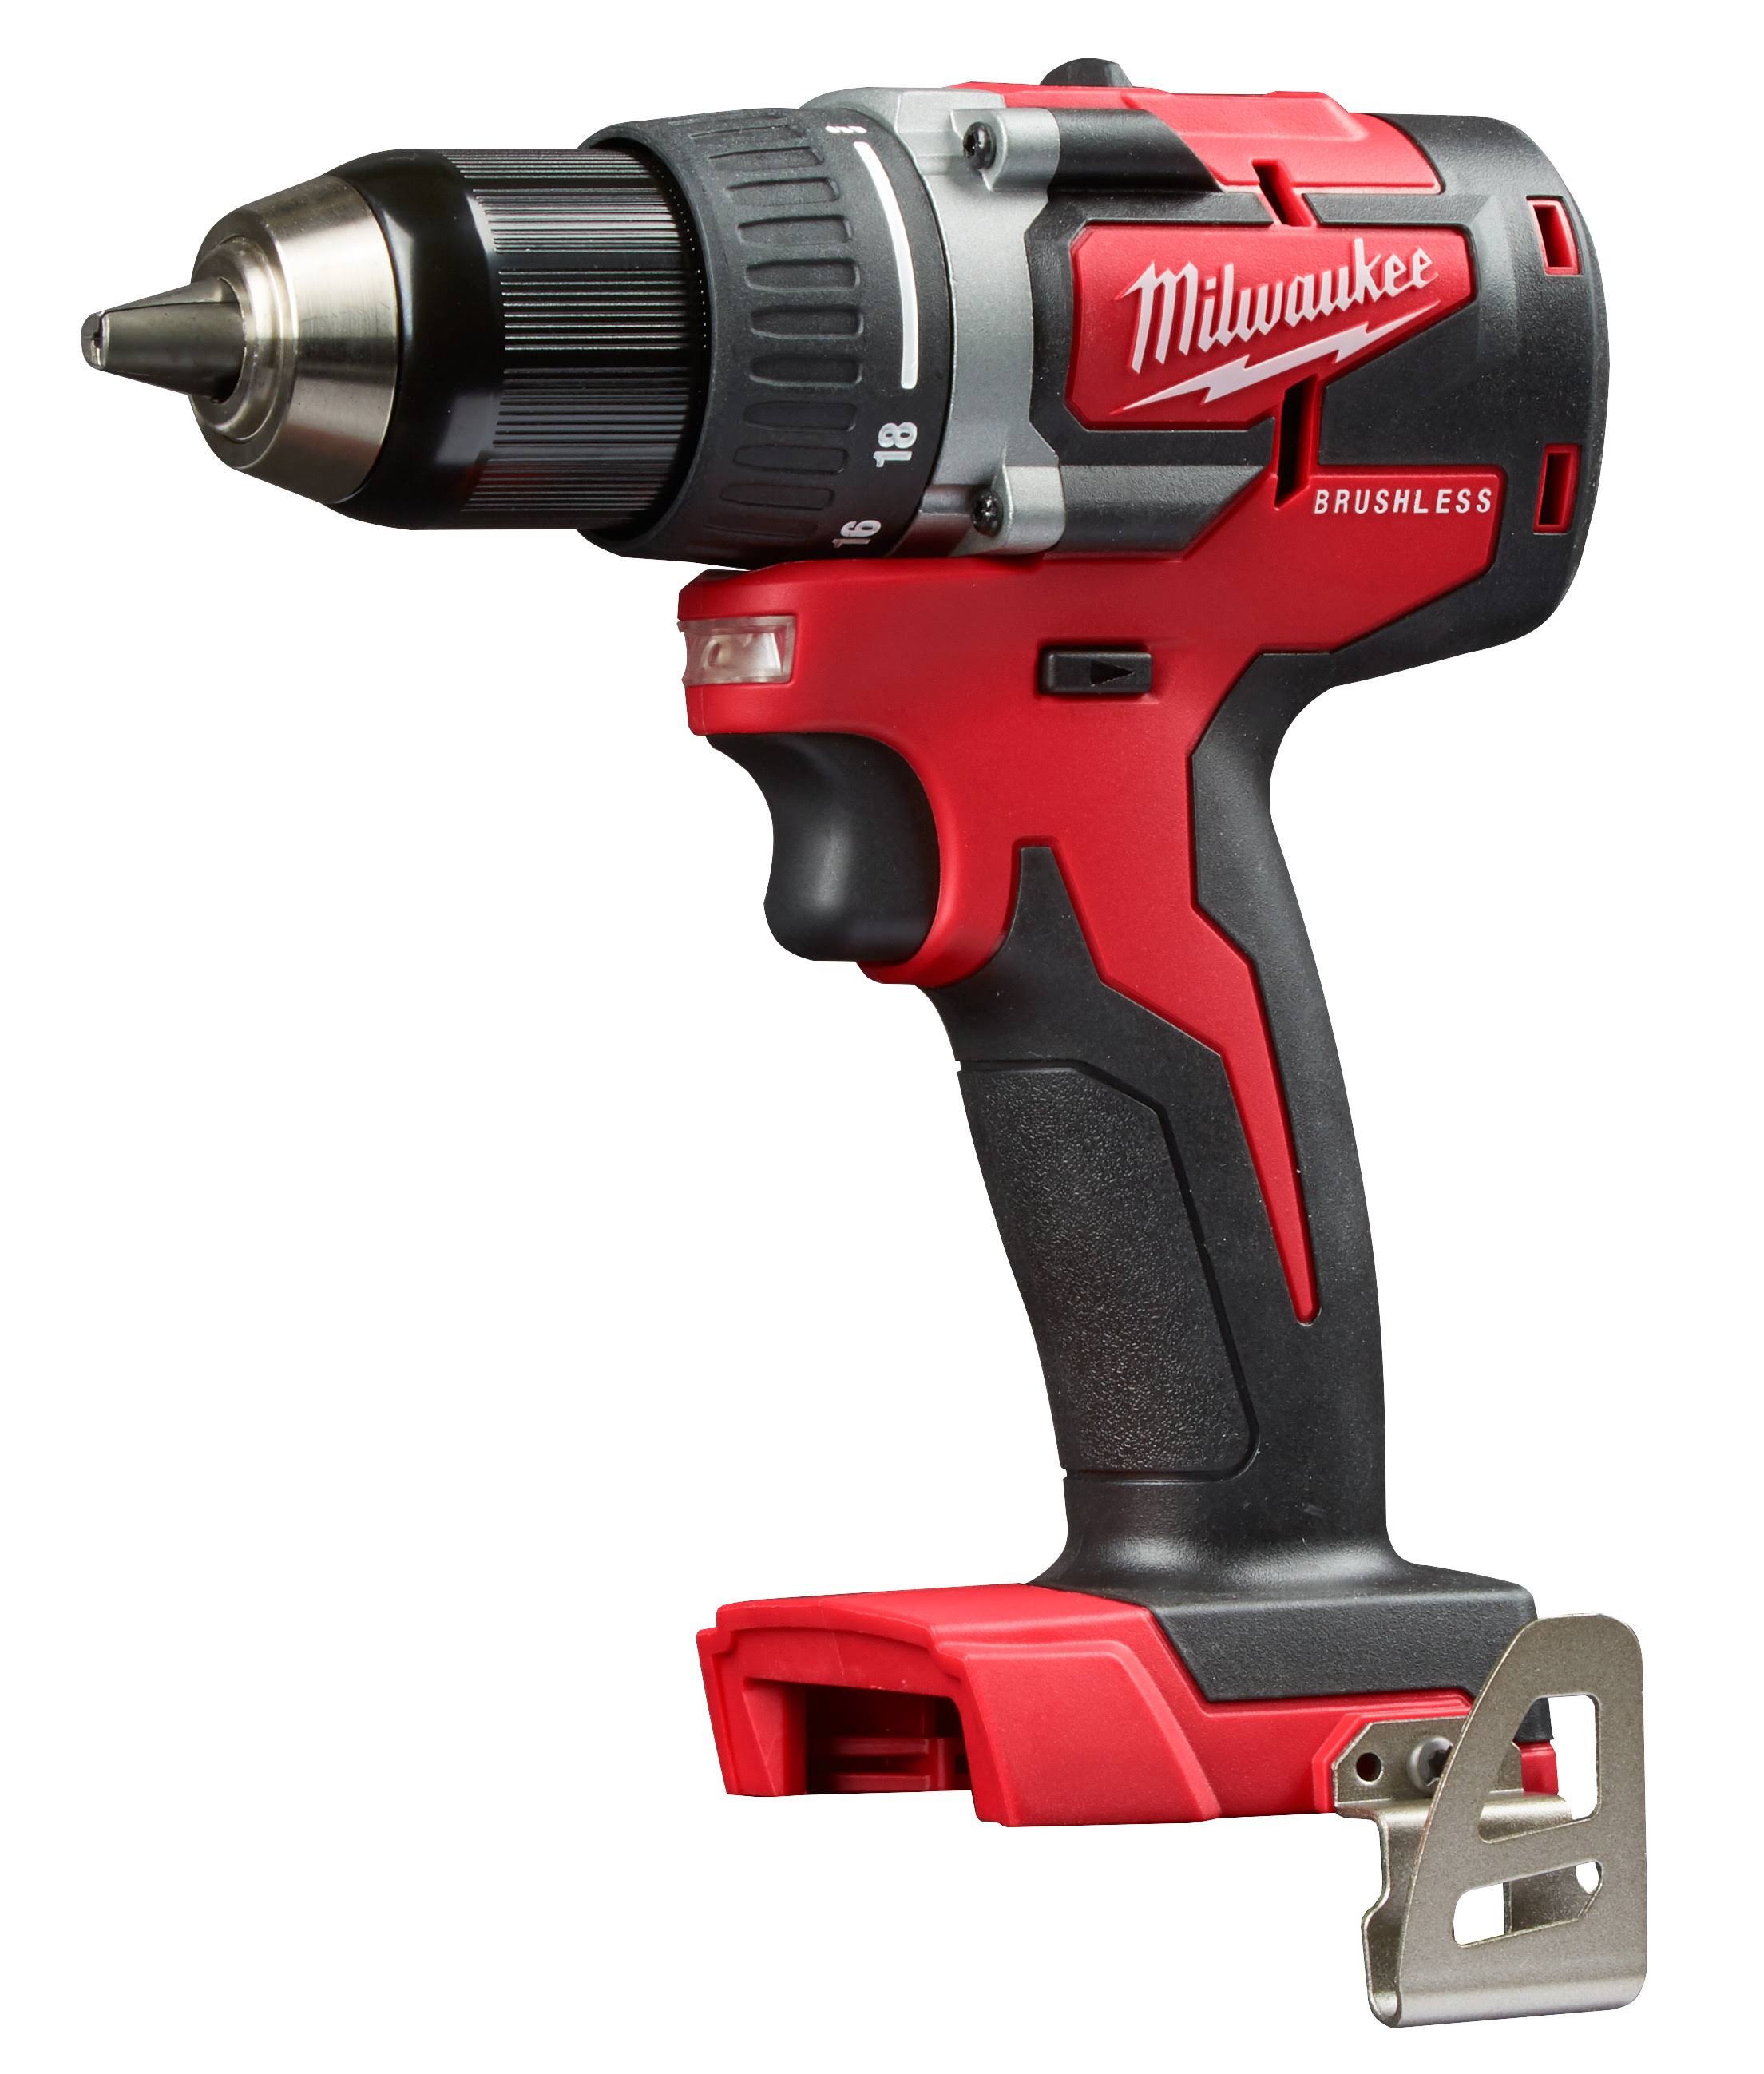 Milwaukee M18 Lithium-Ion Brushless Cordless Compact Drill Driver - 18V, 1/2"